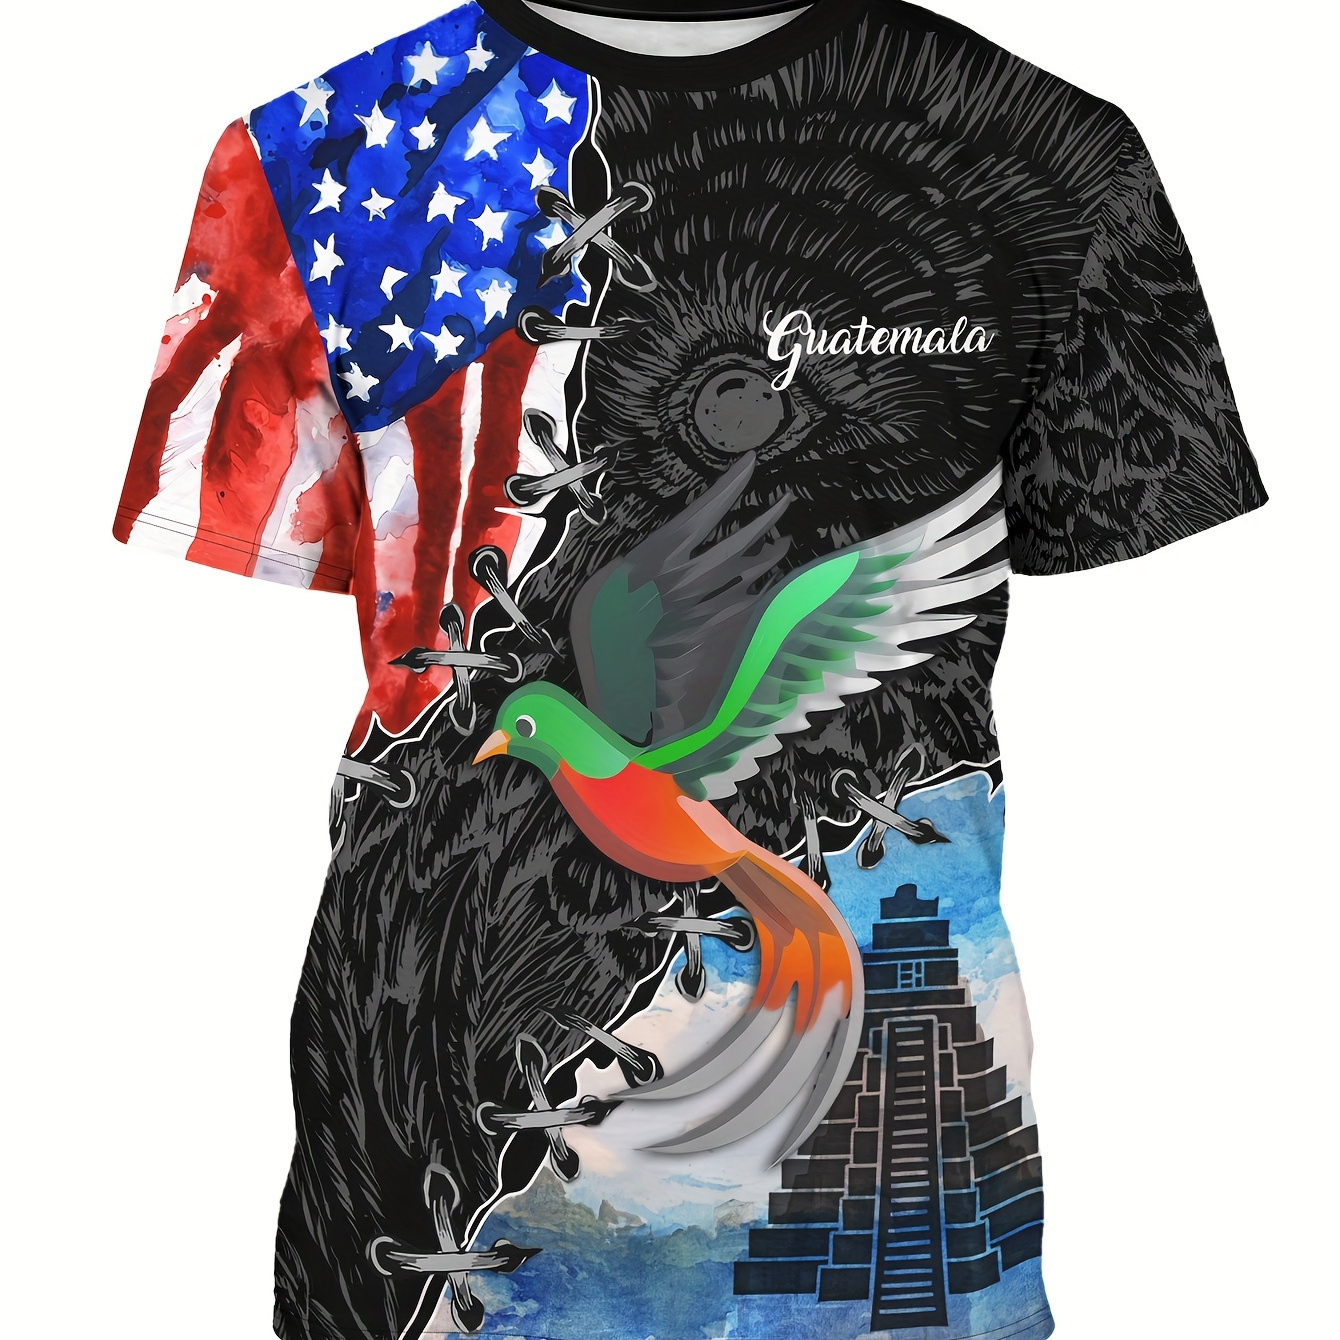 

Men's American And Guatemalan Theme Bird And Architecture Pattern And Letter Print "guatemala" Crew Neck And Short Sleeve T-shirt, Stylish Tops For Summer Outdoors Wear